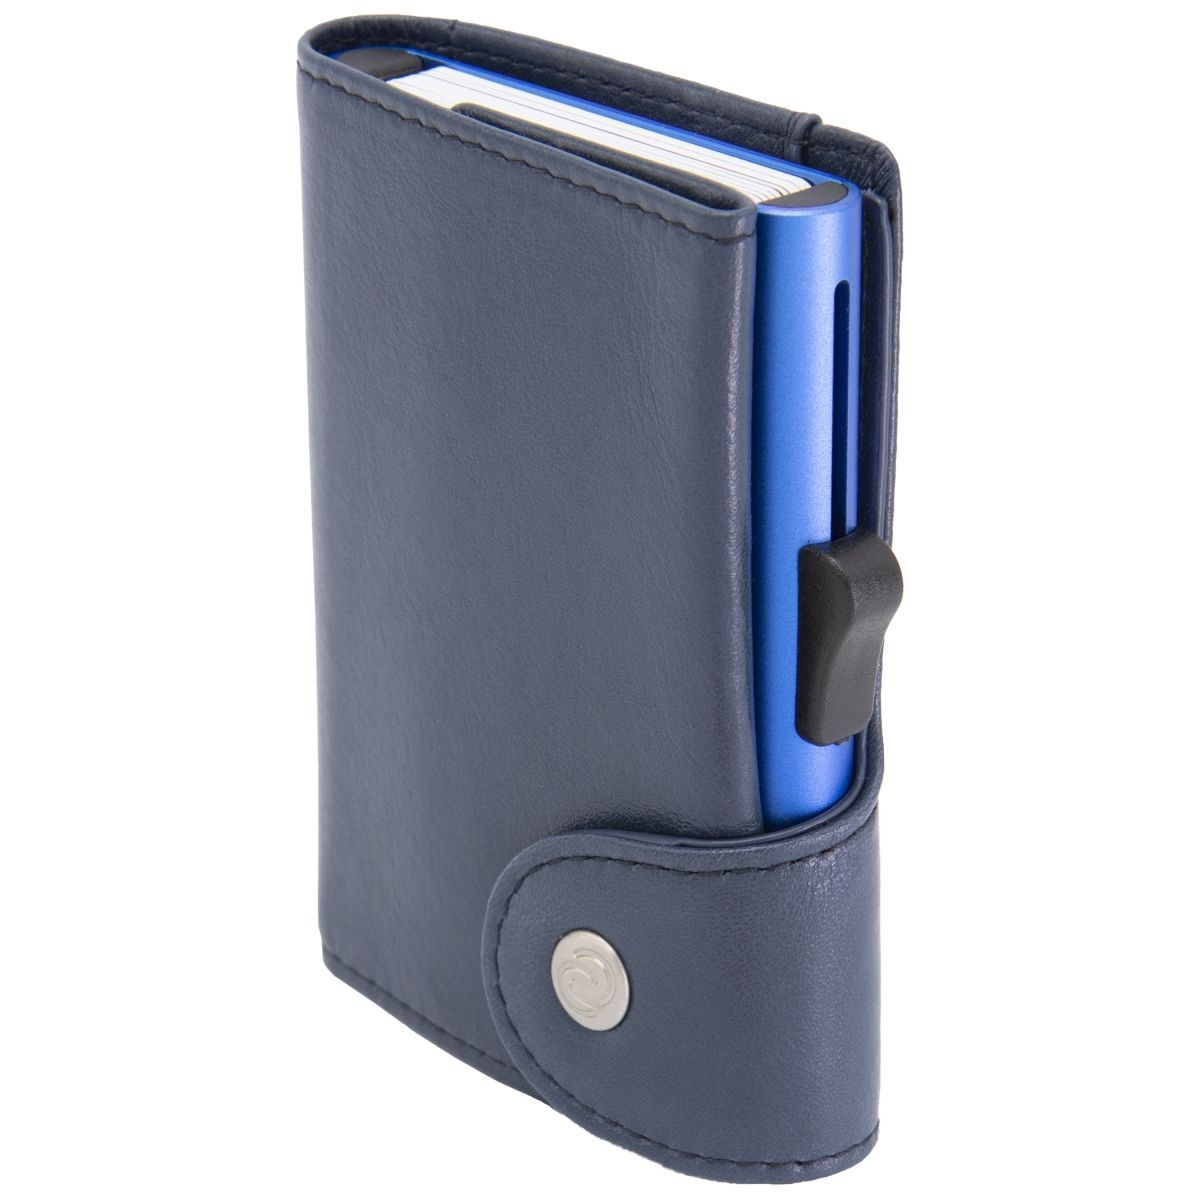 C-Secure XL Aluminum Card Holder with Genuine Leather - Blue